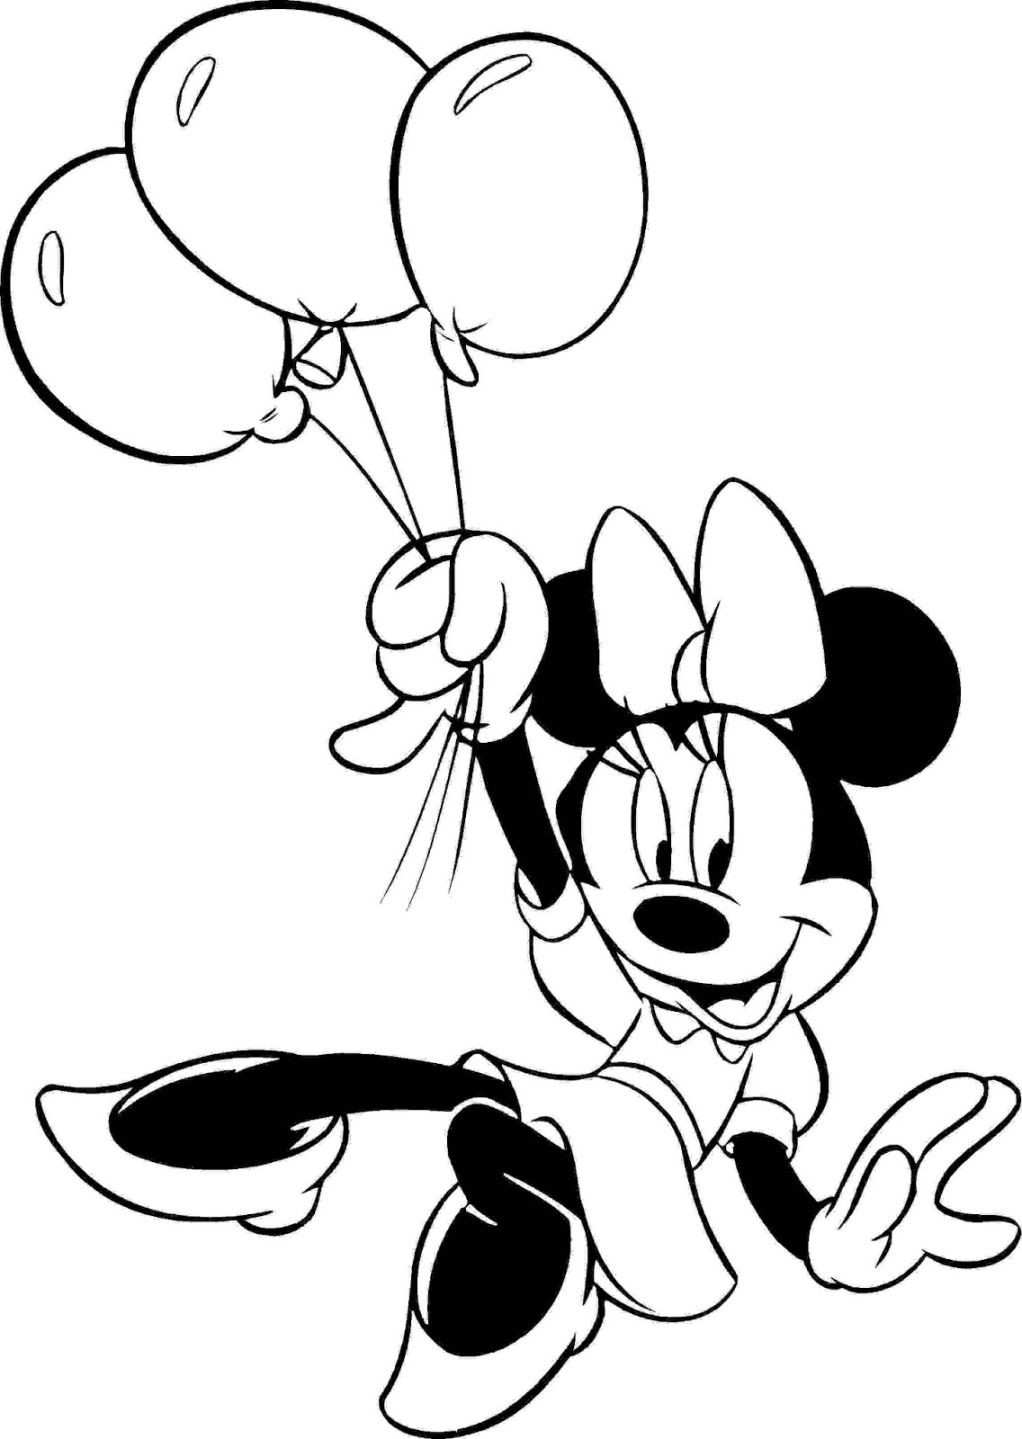 mickey-mouse-line-drawing-free-download-on-clipartmag